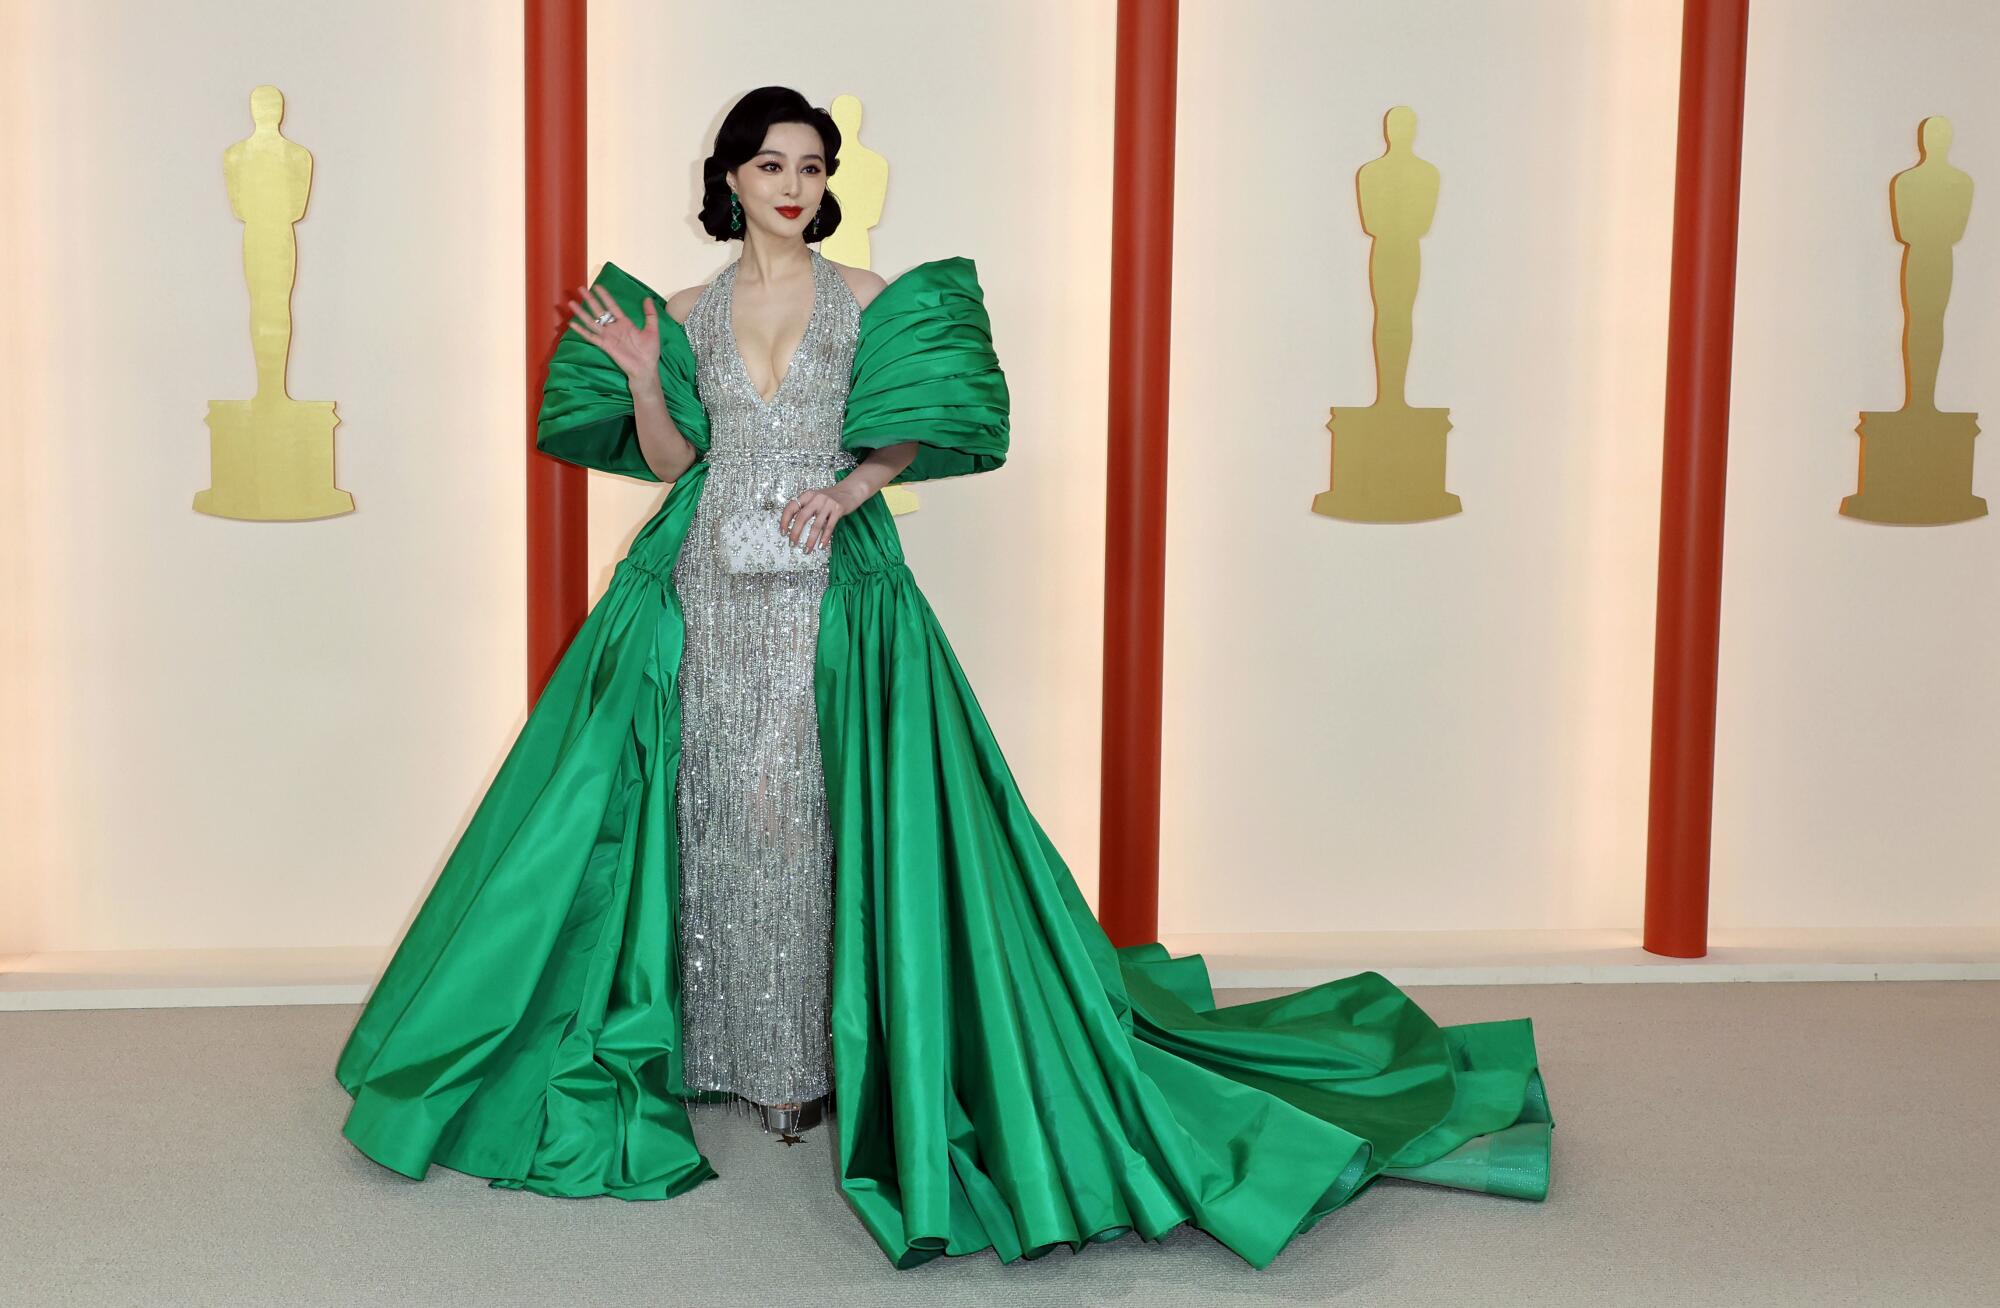 Best Dressed at the 95th Oscars